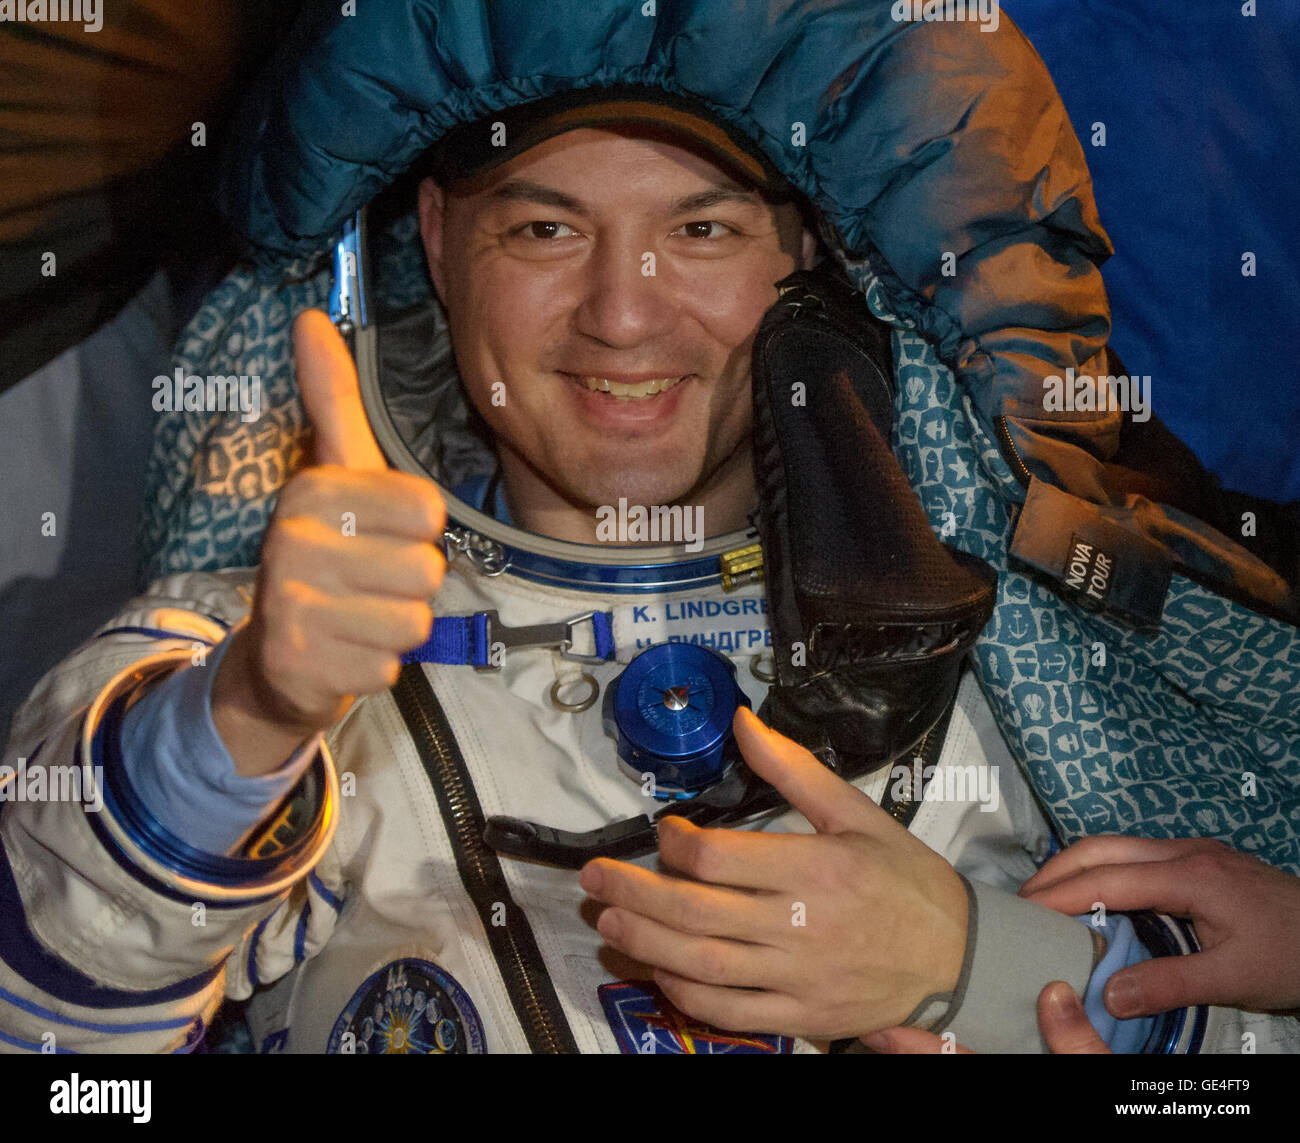 NASA Astronaut Kjell Lindgren rests in a chair just minutes after he and Kimya Yui of the Japan Aerospace Exploration Agency (JAXA) and Oleg Kononenko of the Russian Federal Space Agency (Roscosmos) landed in their Soyuz TMA-17M spacecraft  in a remote area near the town of Zhezkazgan, Kazakhstan on Friday, December 11, 2015. Kononenko, Lindgren, and Yui returned after 141 days in space where they served as members of the Expedition 44 and 45 crews onboard the International Space Station. Photo Credit: (NASA/GCTC/Andrey Shelepin)  Image #: Date: December 11, 2015 Stock Photo